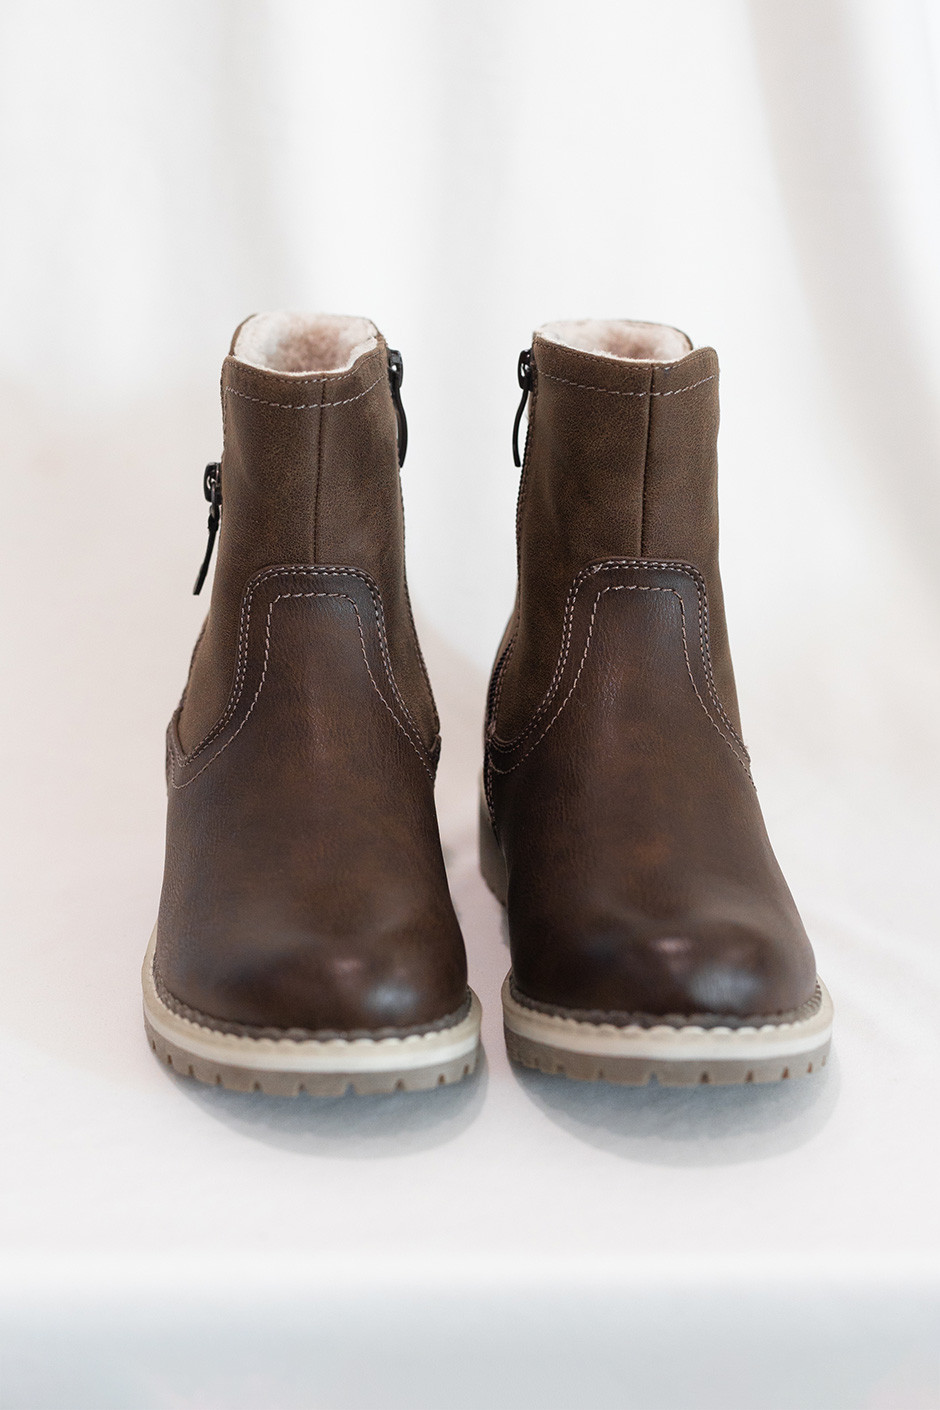 Our Time Away Boots | Silver Icing